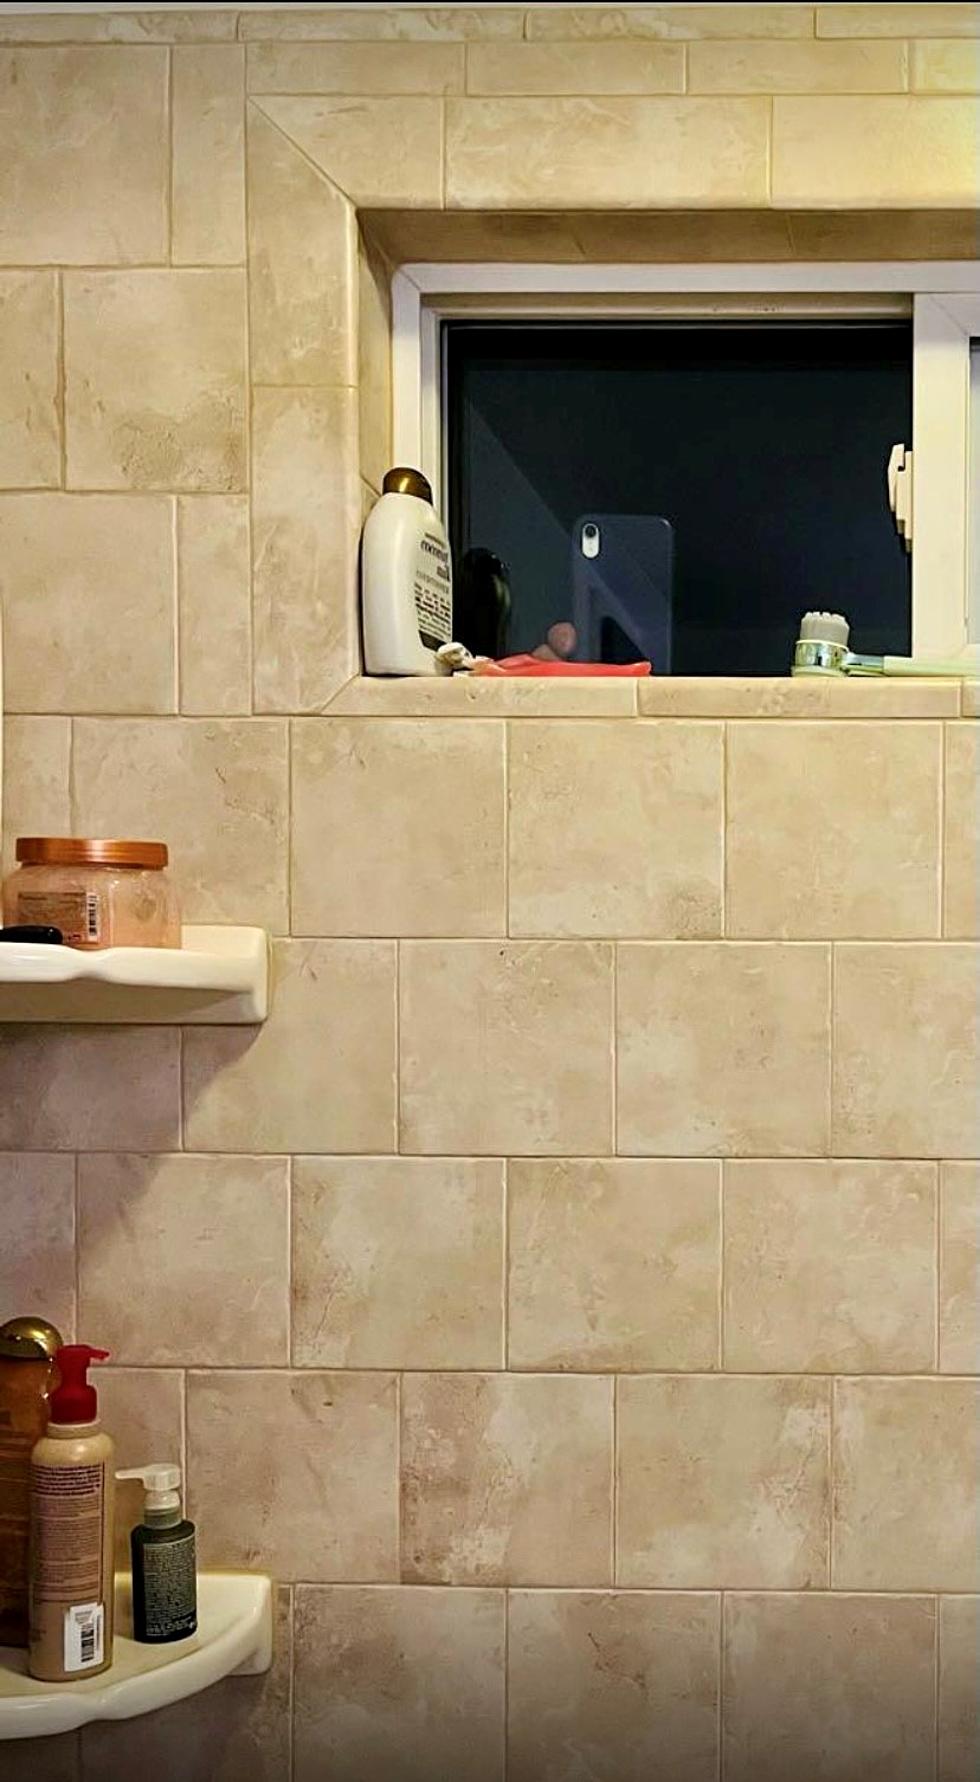 Woman’s Shocking Shower Photo Reveals Danger In Boise’s North End